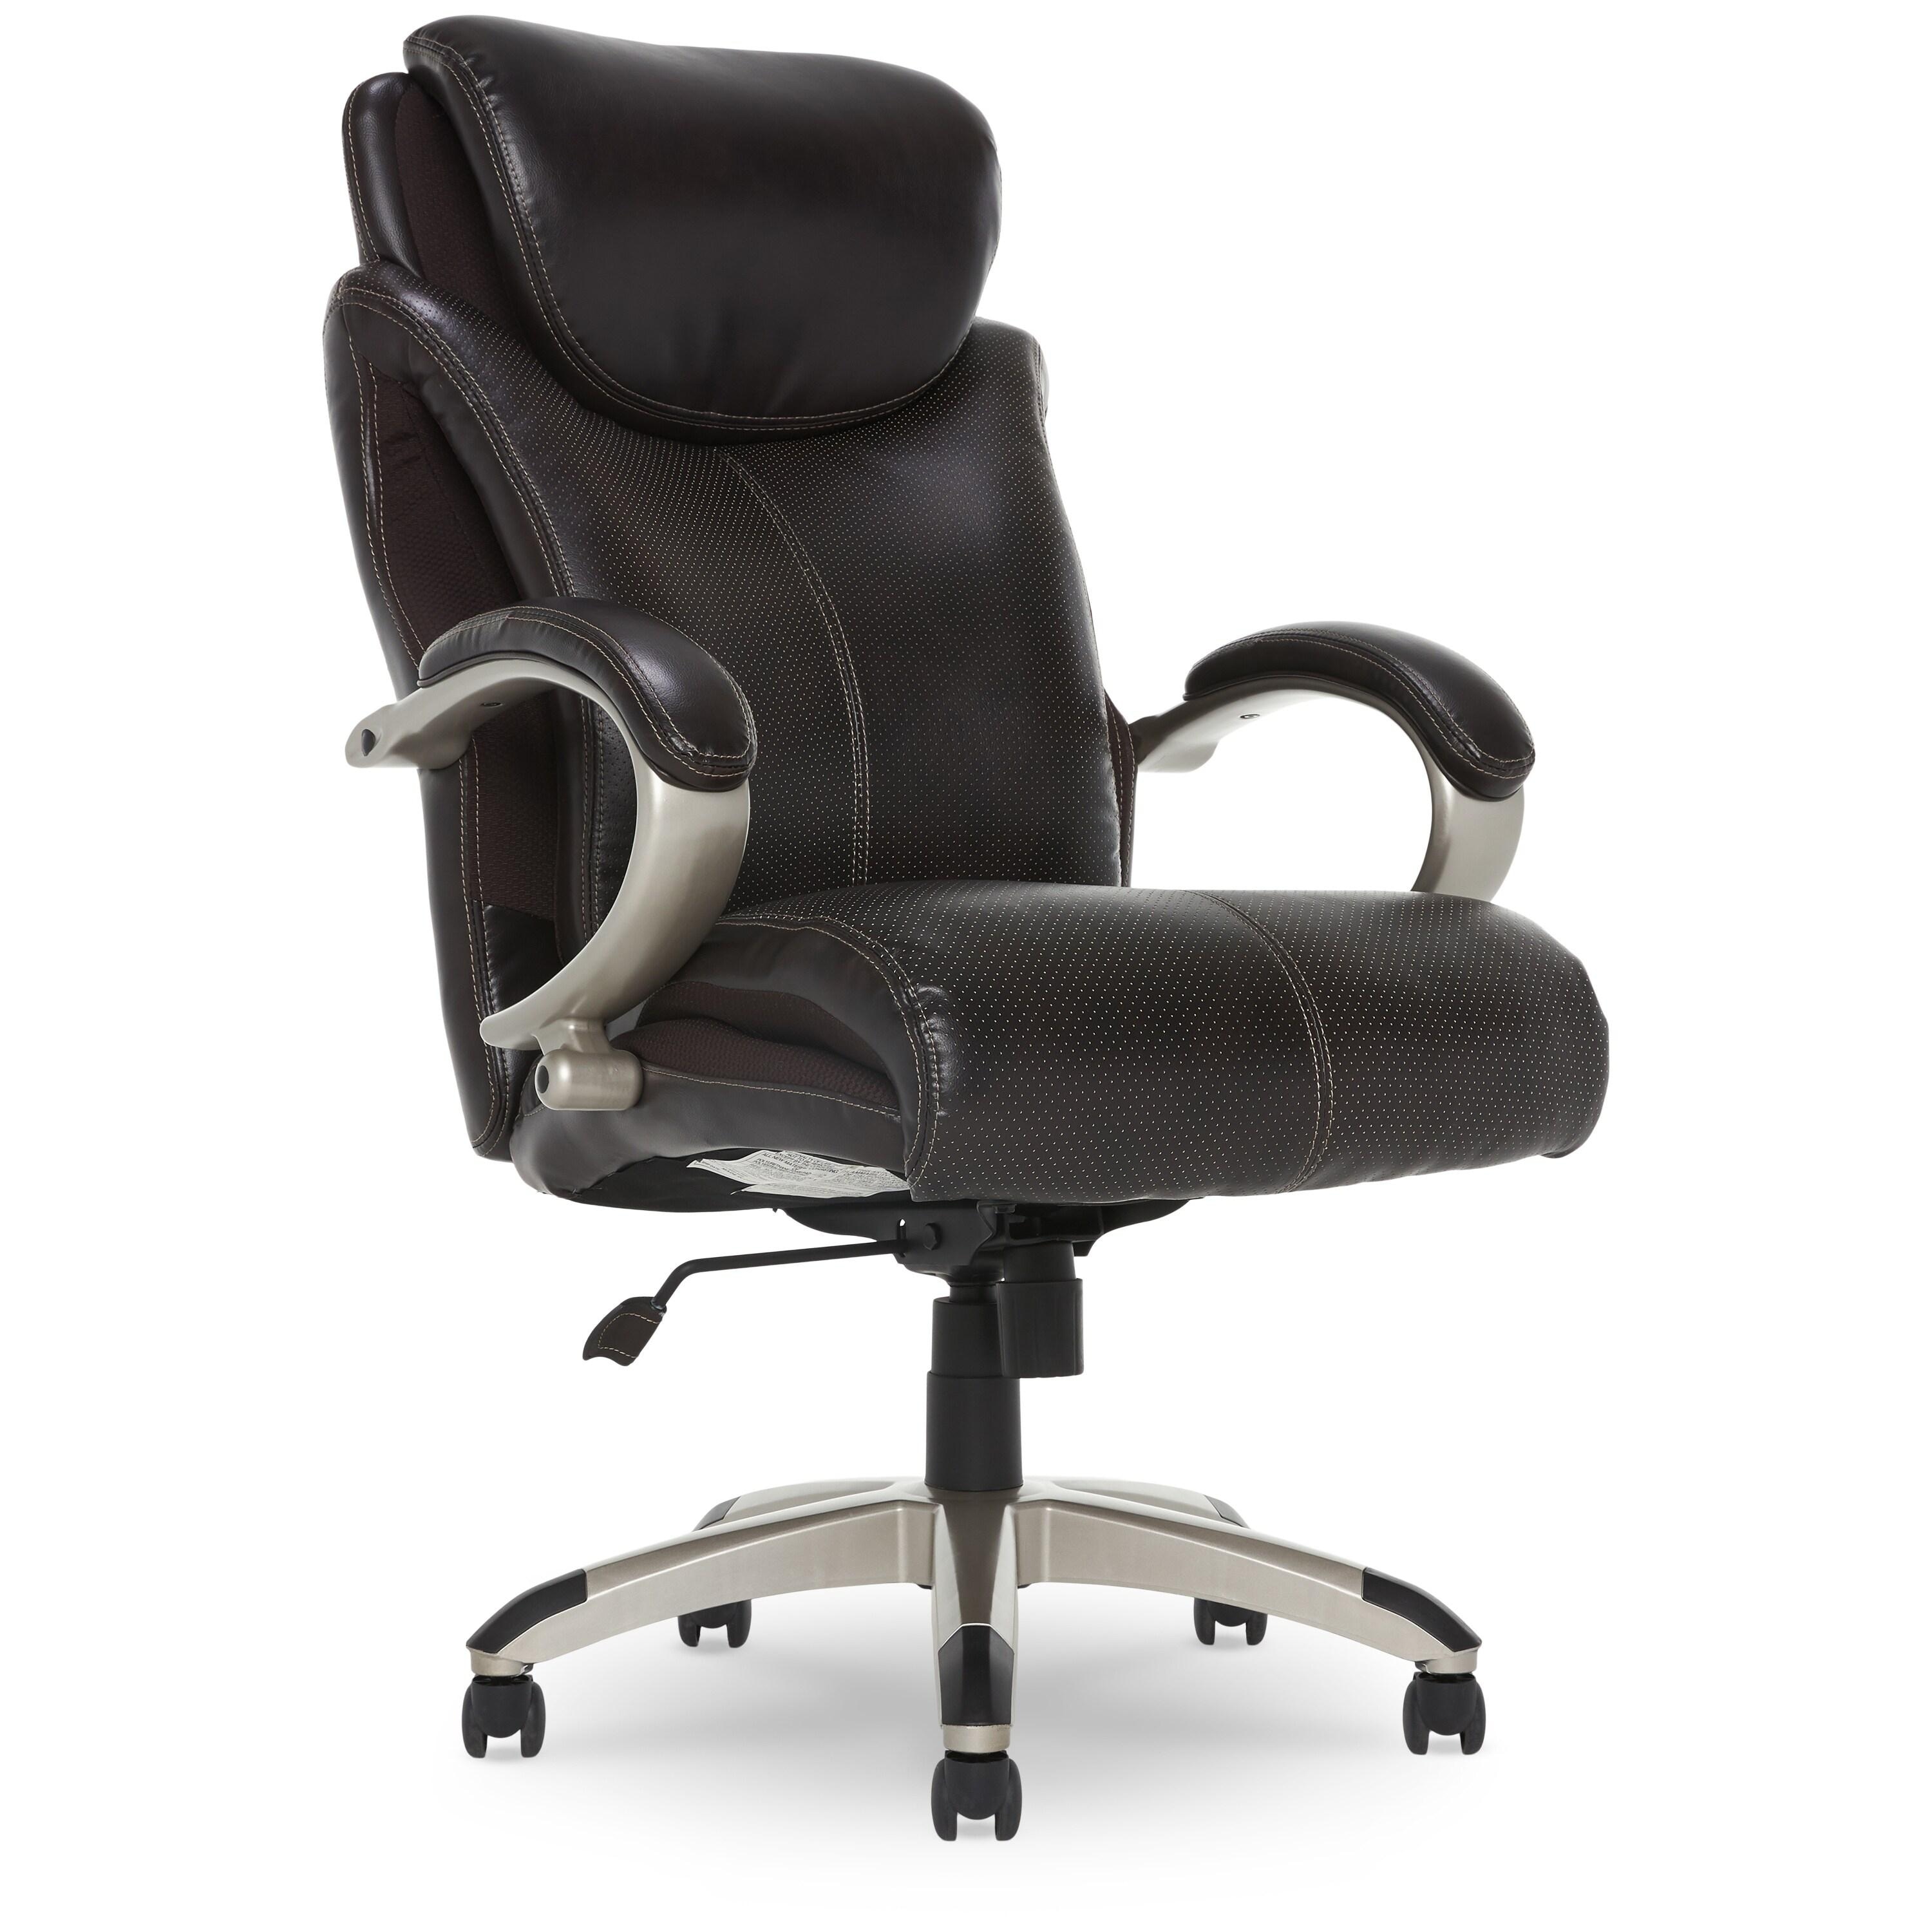 https://ak1.ostkcdn.com/images/products/is/images/direct/a55c485862cac669a8e2deaa5241f54eab4803ca/Serta-Dayton-Big-and-Tall-Executive-Office-Chair.jpg